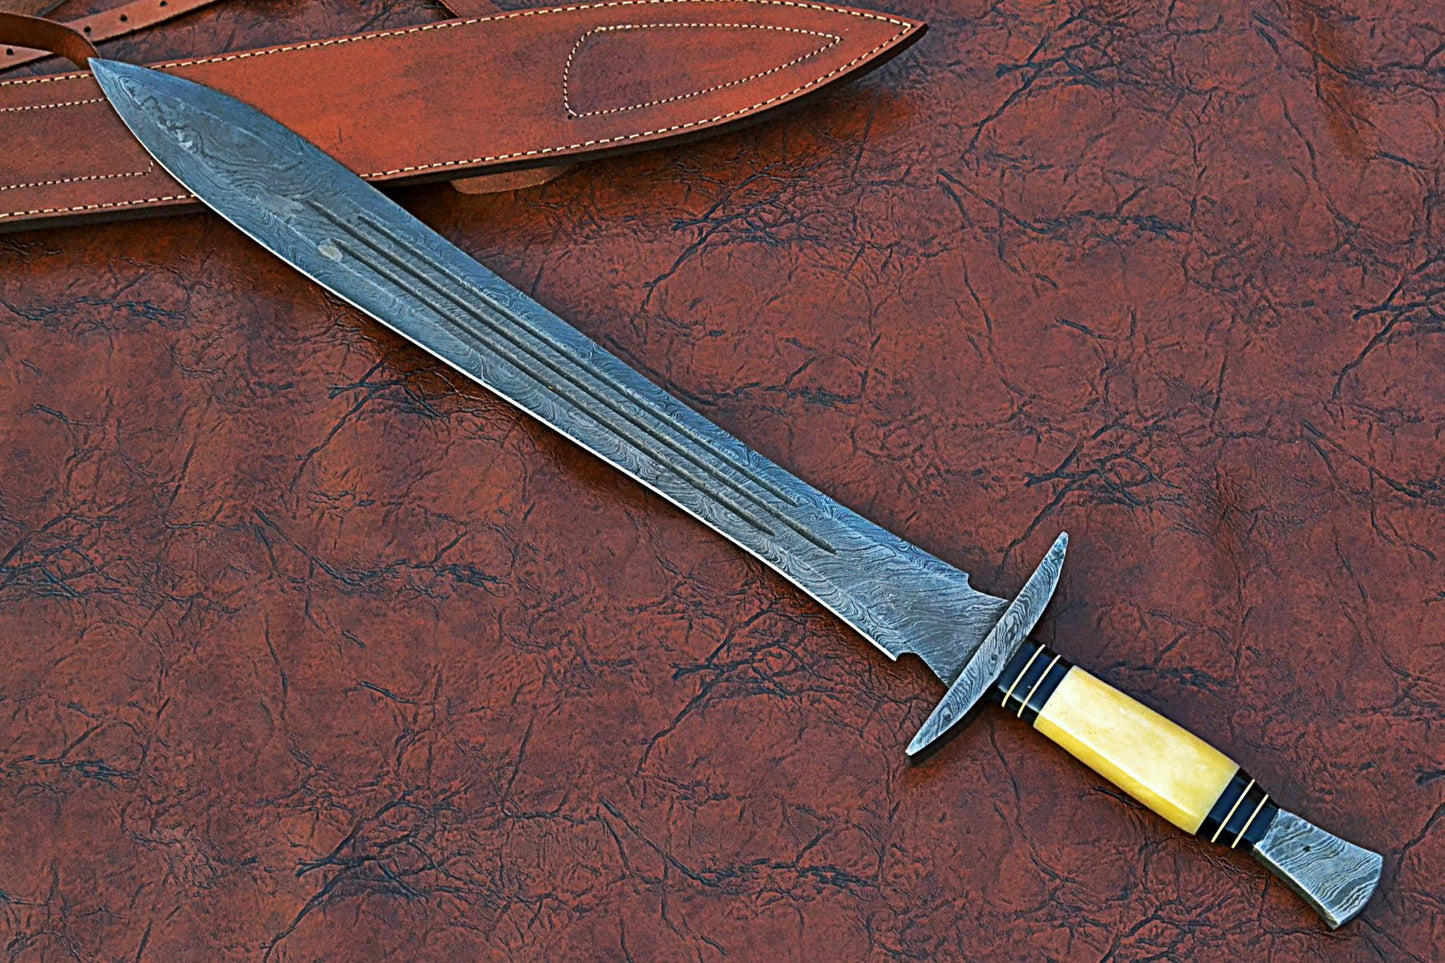 27" Long Sting Sword, 19" Long Hand Forged Damascus Steel Double Edge Blade with Triple Blood Groove, Brass Cross hilt Forward and Pommel, Damascus Guard & Pommel, Camel Bone Grip, Leather Scabbard